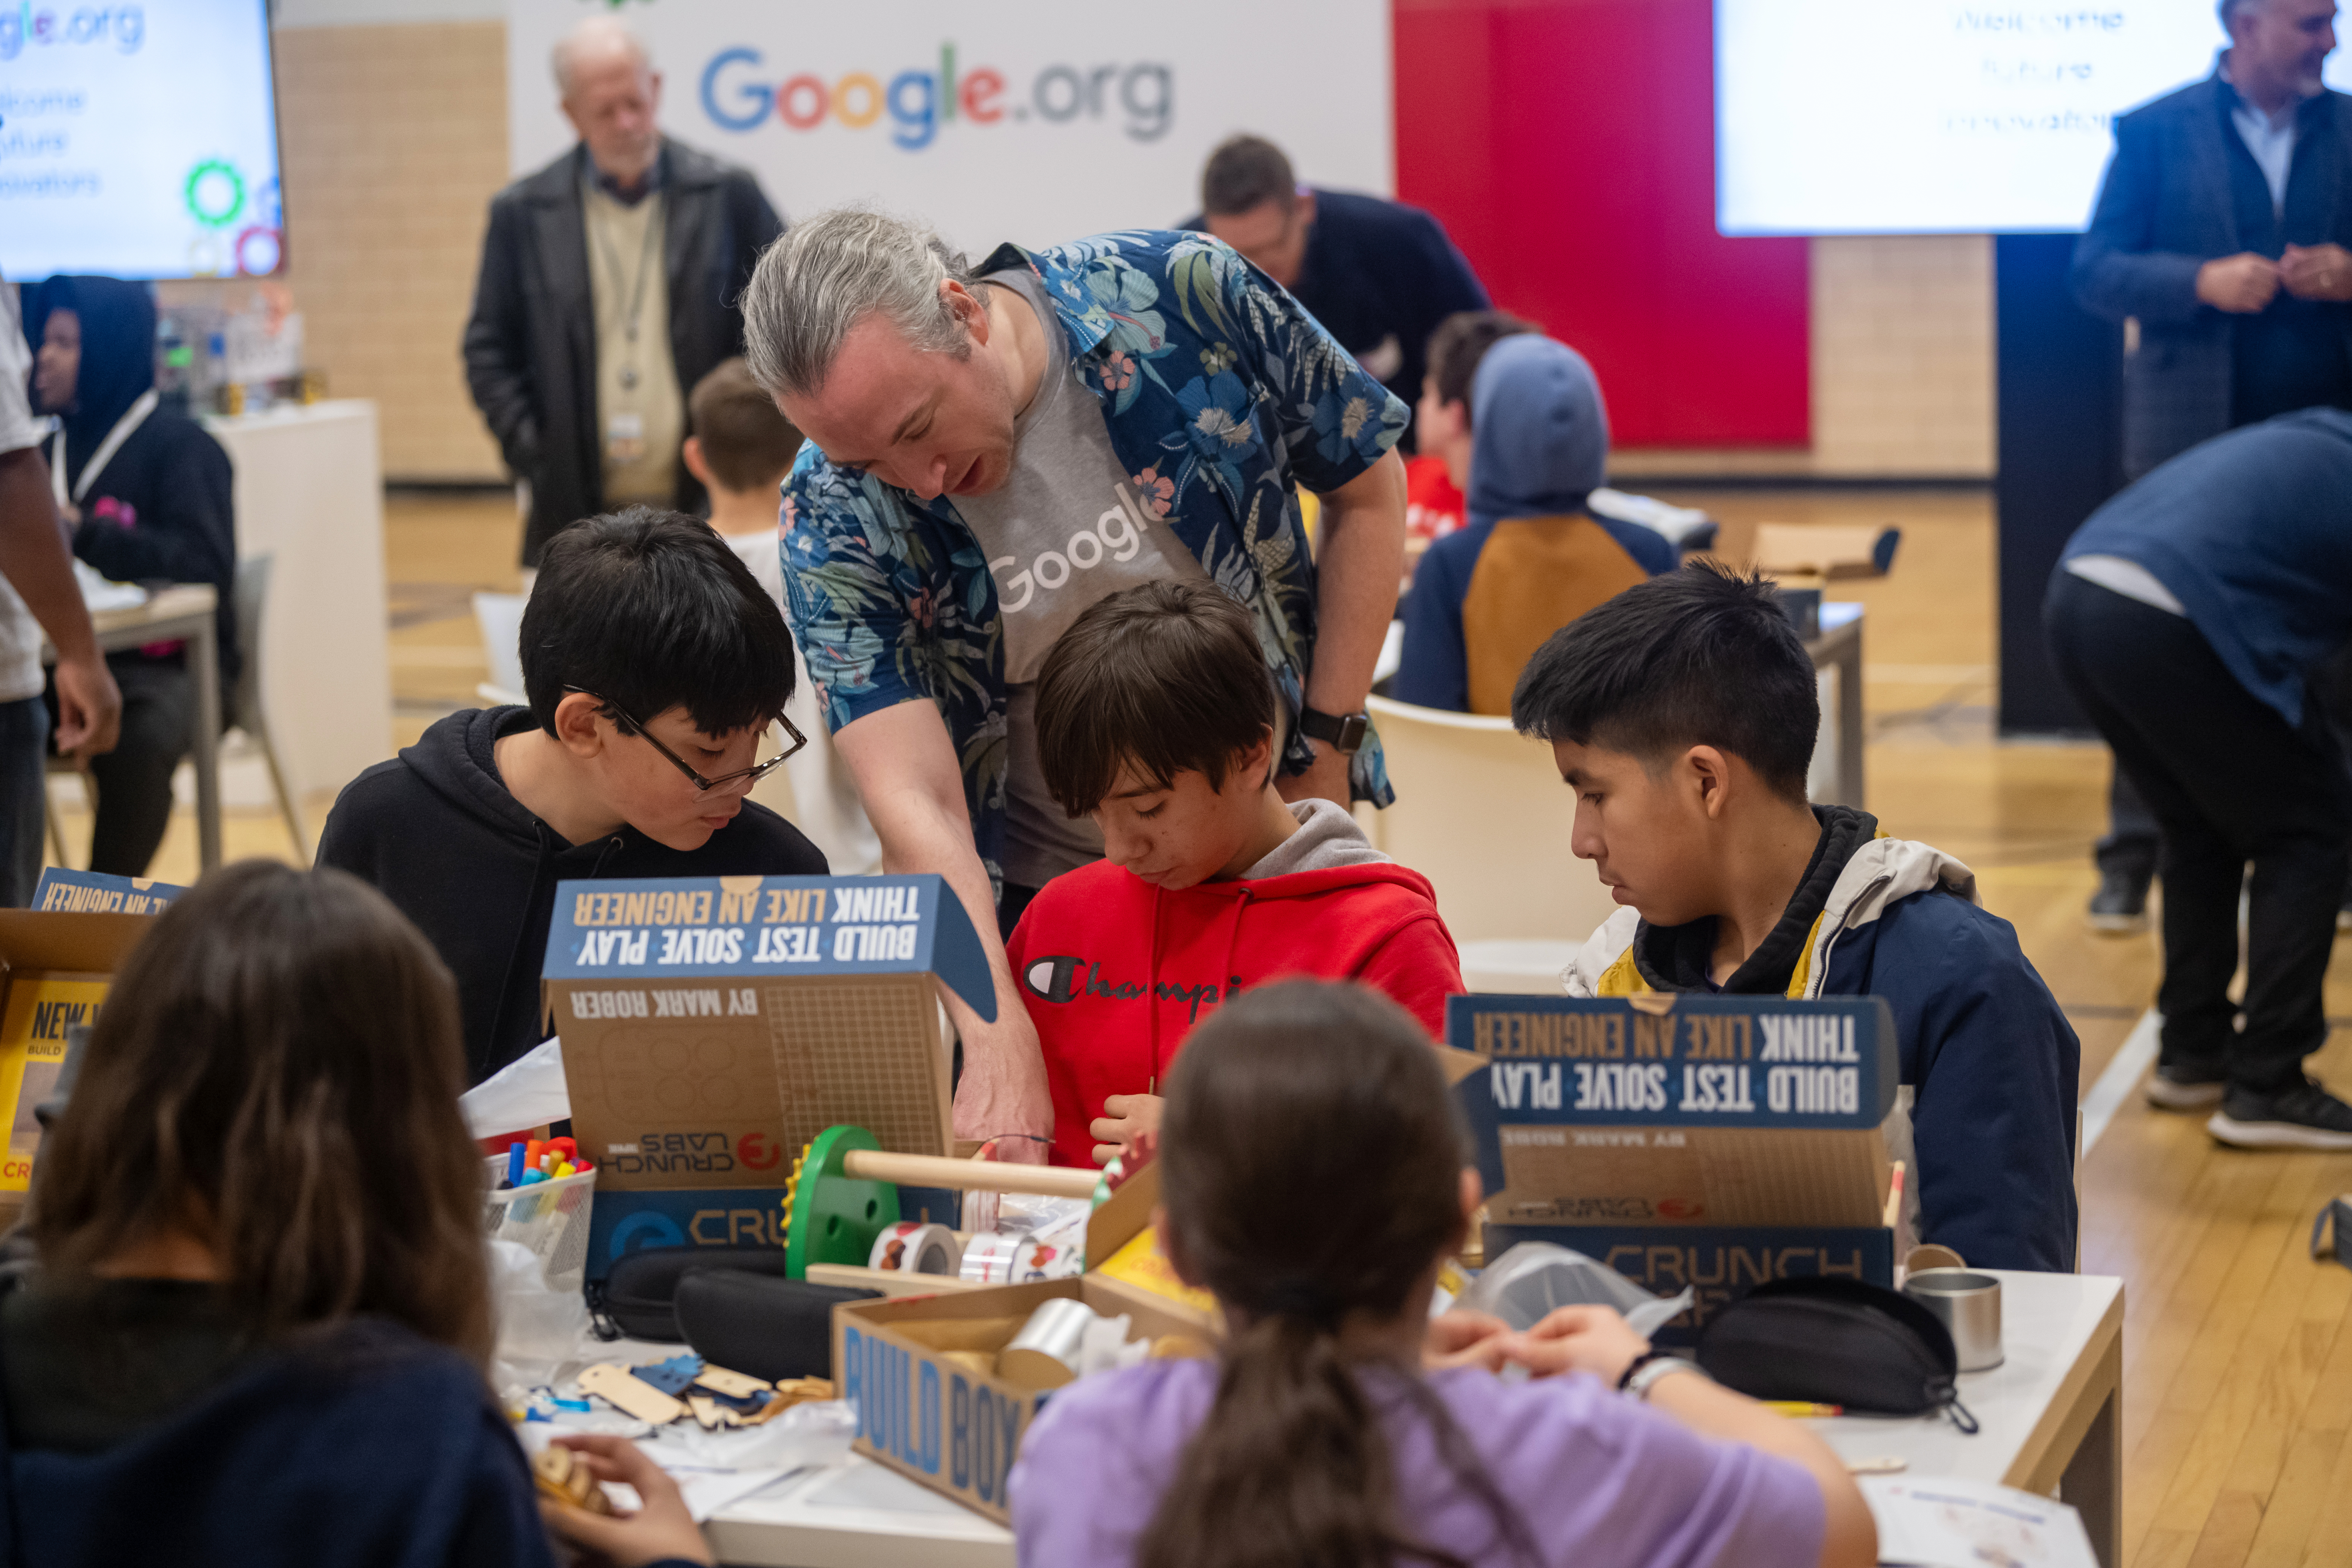 Google employees volunteered at the event to assist students working on STEM activities.